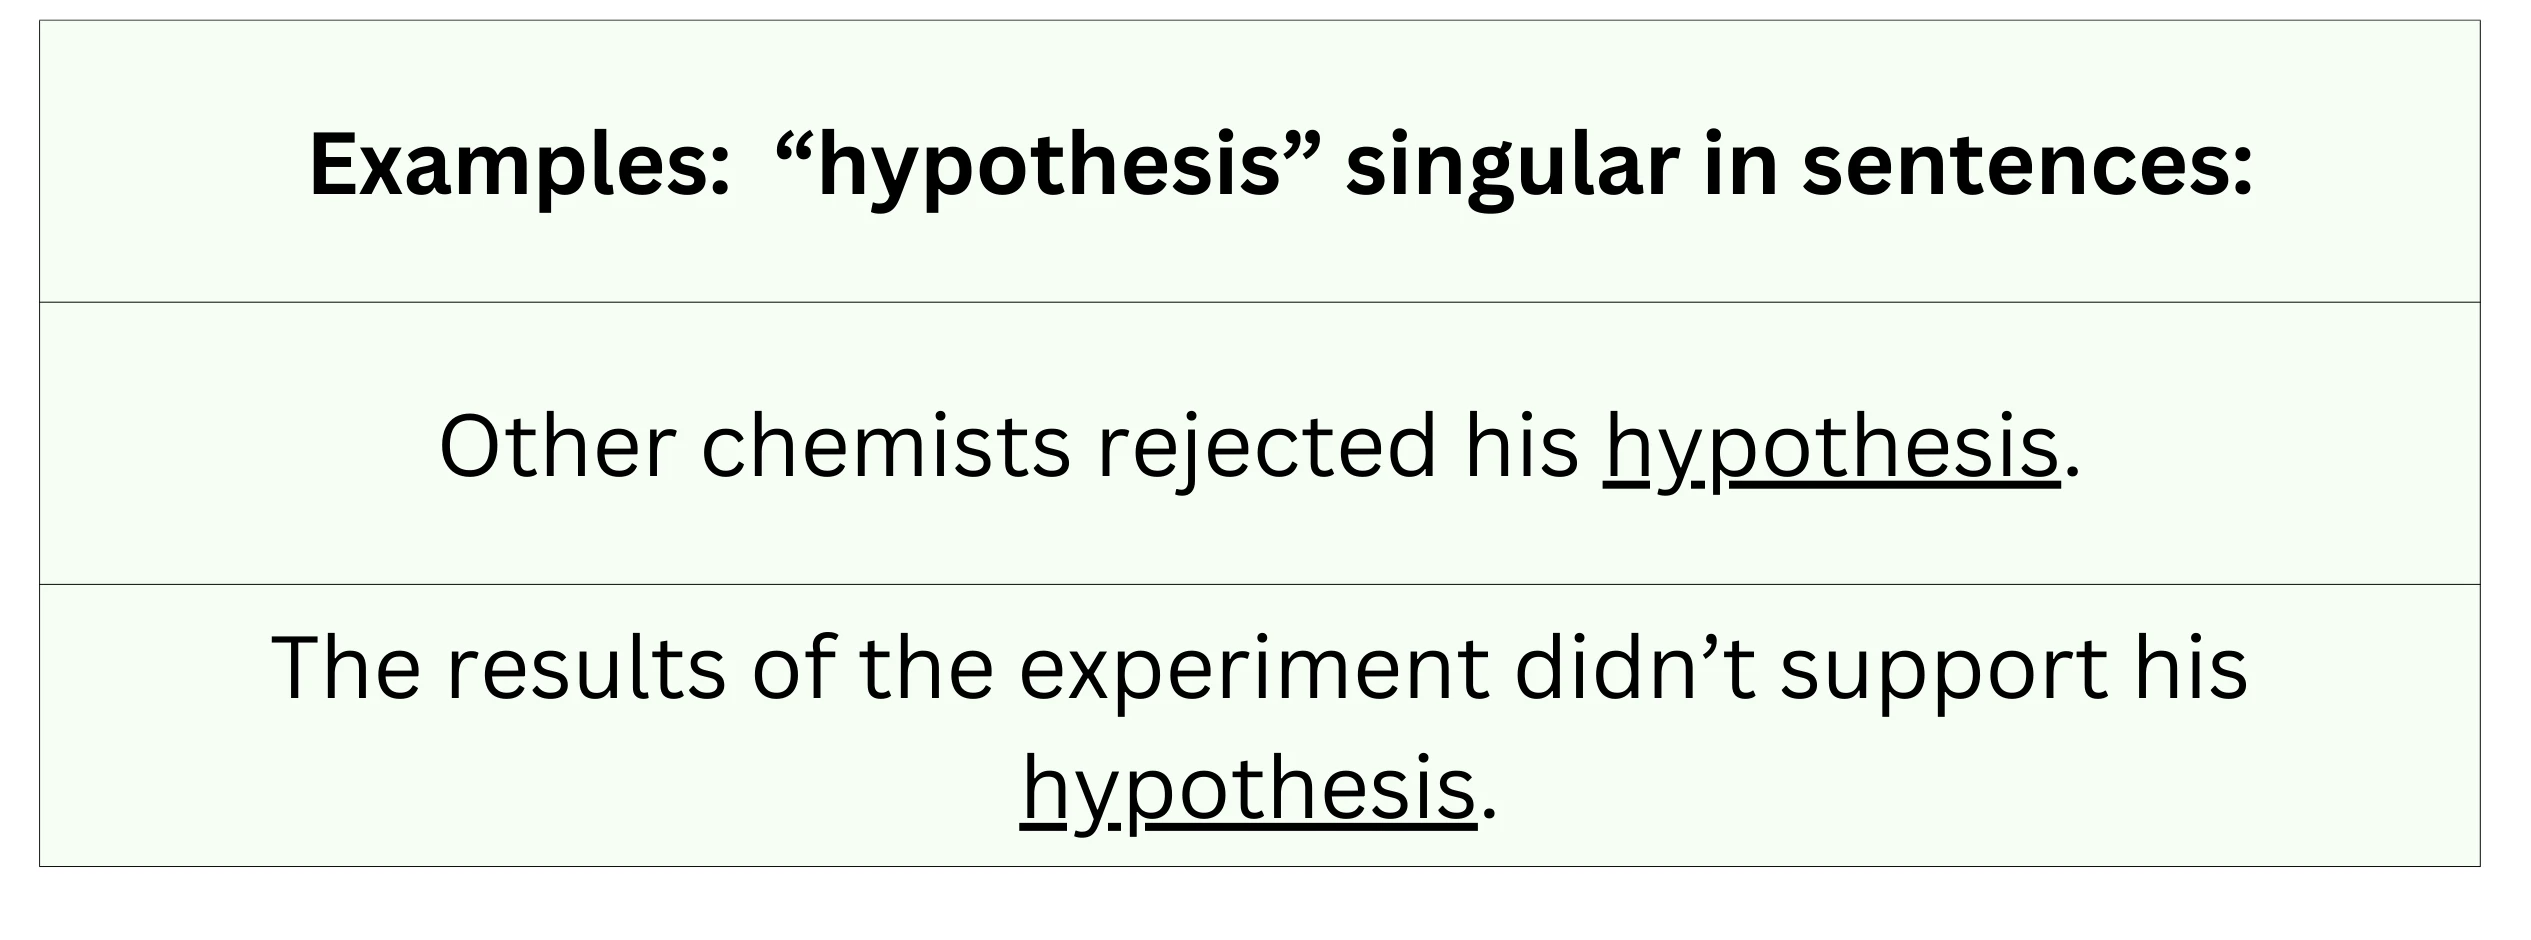 hypotheses plural for hypothesis